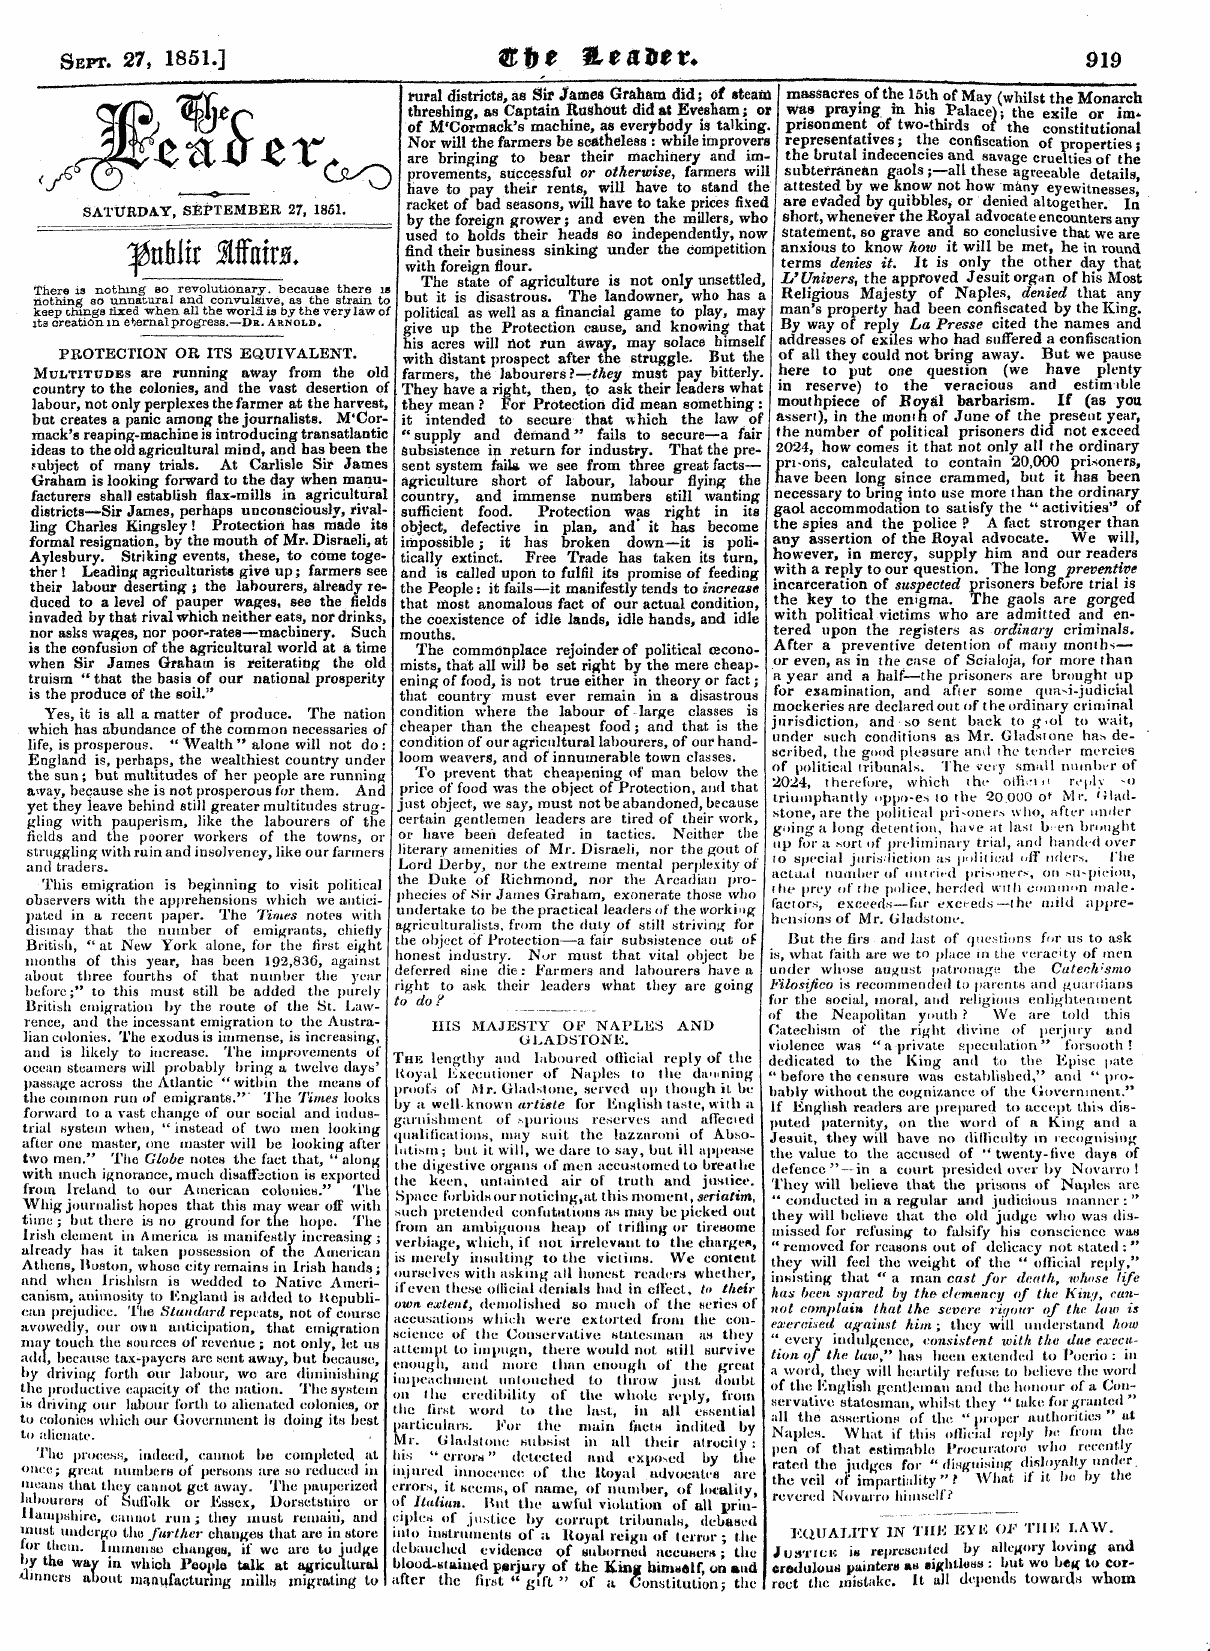 Leader (1850-1860): jS F Y, Country edition - Saturday, September 27, 1851.